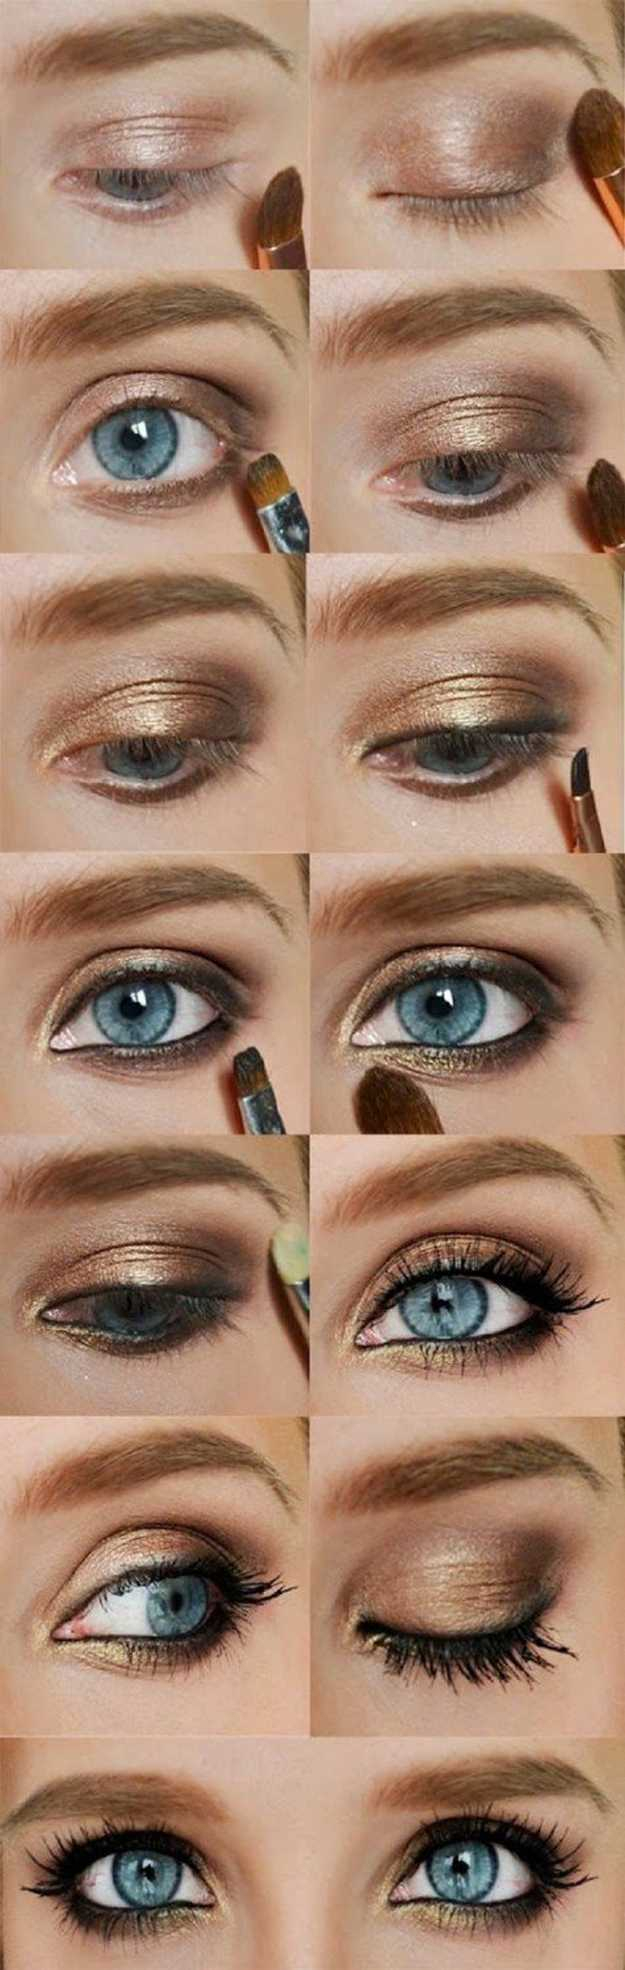 Gold Makeup For Blue Eyes Colorful Eyeshadow Tutorials For Blue Eyes Makeup Tutorials